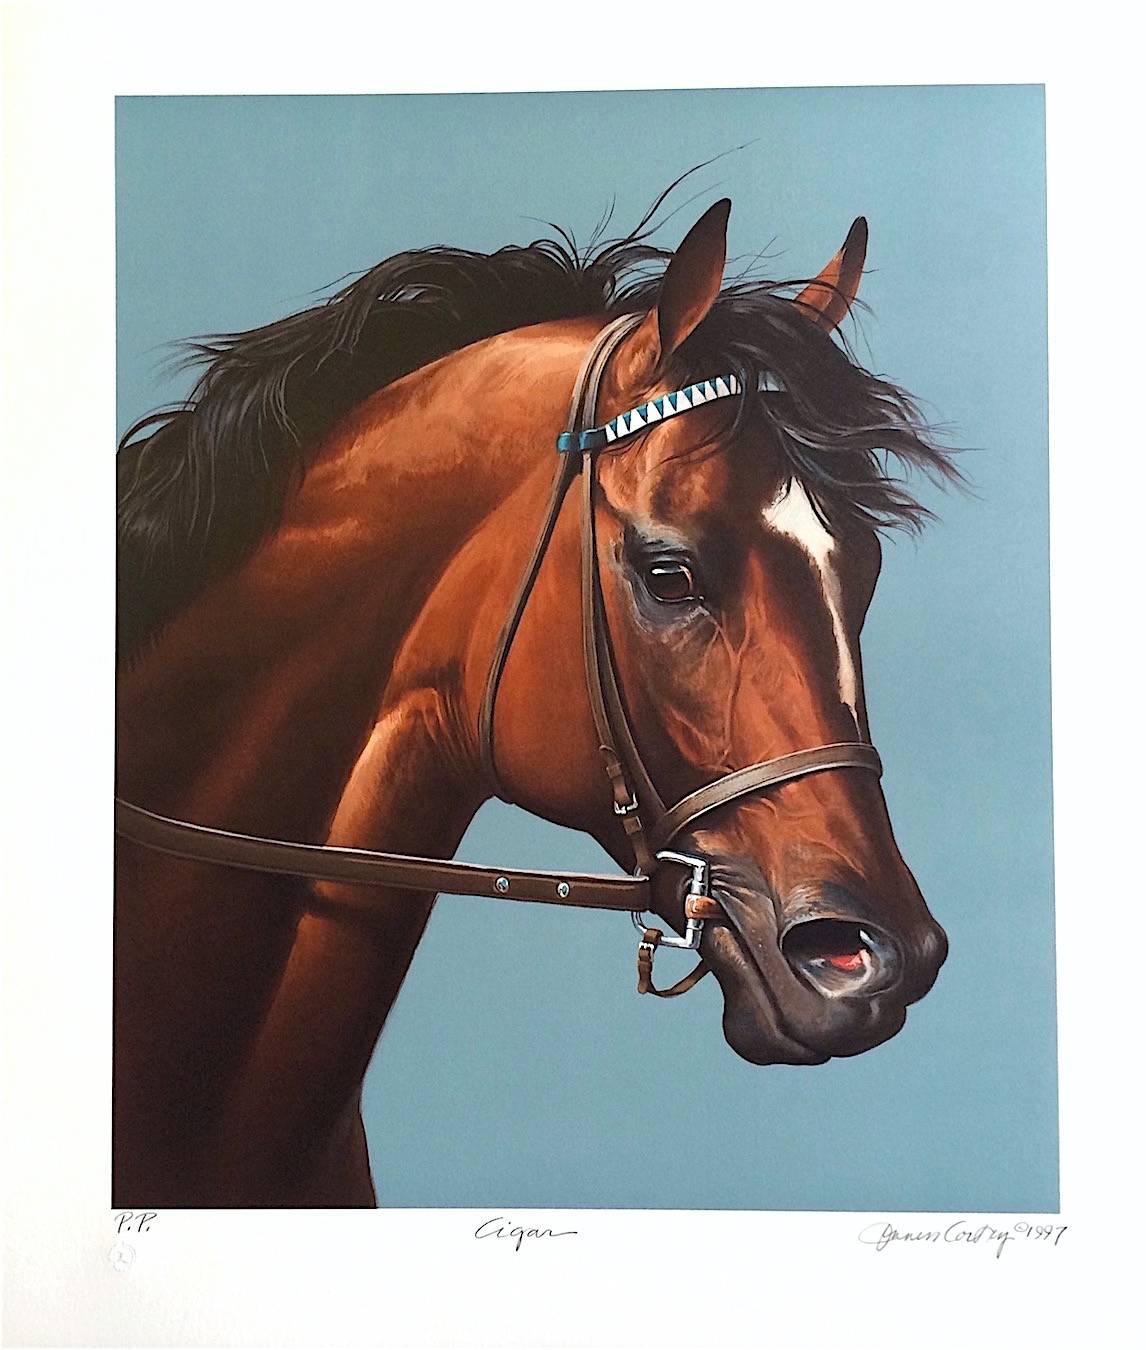 CIGAR-Champion Horse Portrait, Hand Drawn Lithograph, Horse Racing - Print by Jenness Cortez